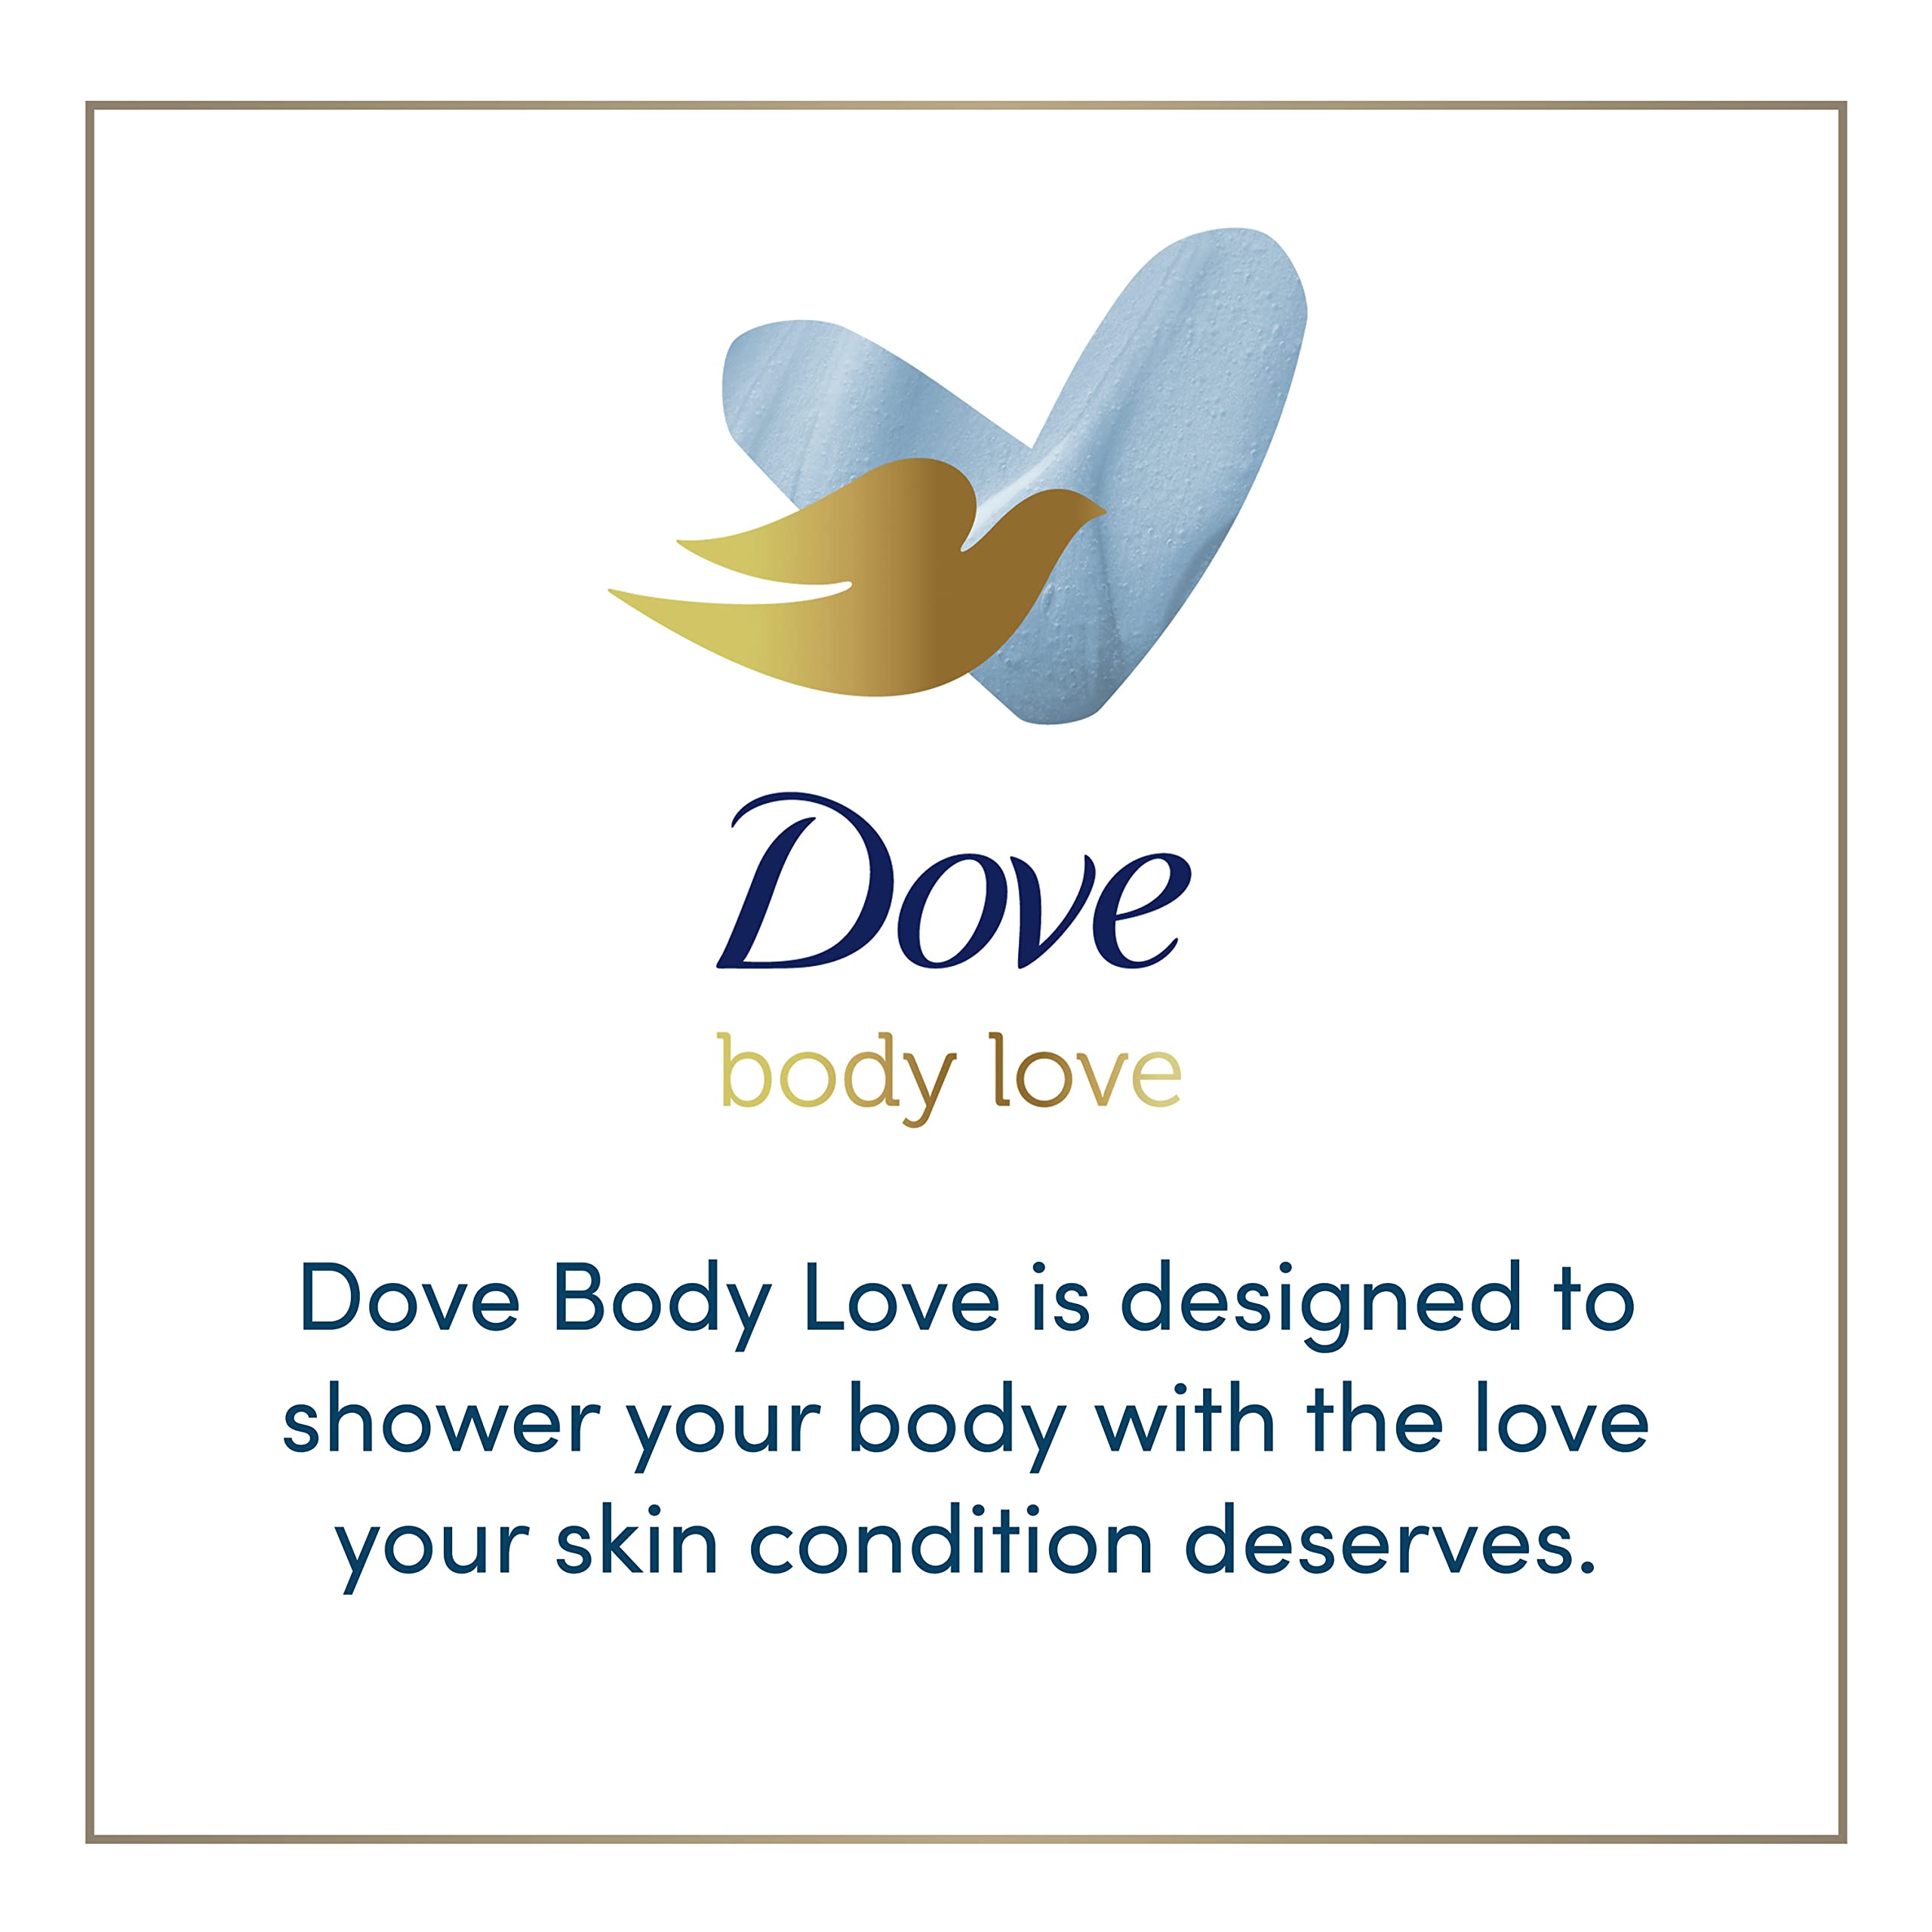 Dove Body Love Body Cleanser Body Wash 3 Count Dry-Cracked Skin Replenish Hypoallergenic for 24 Hour Nourishment & Instant Dryness Relief with Pro Ceramides 17.5 FO